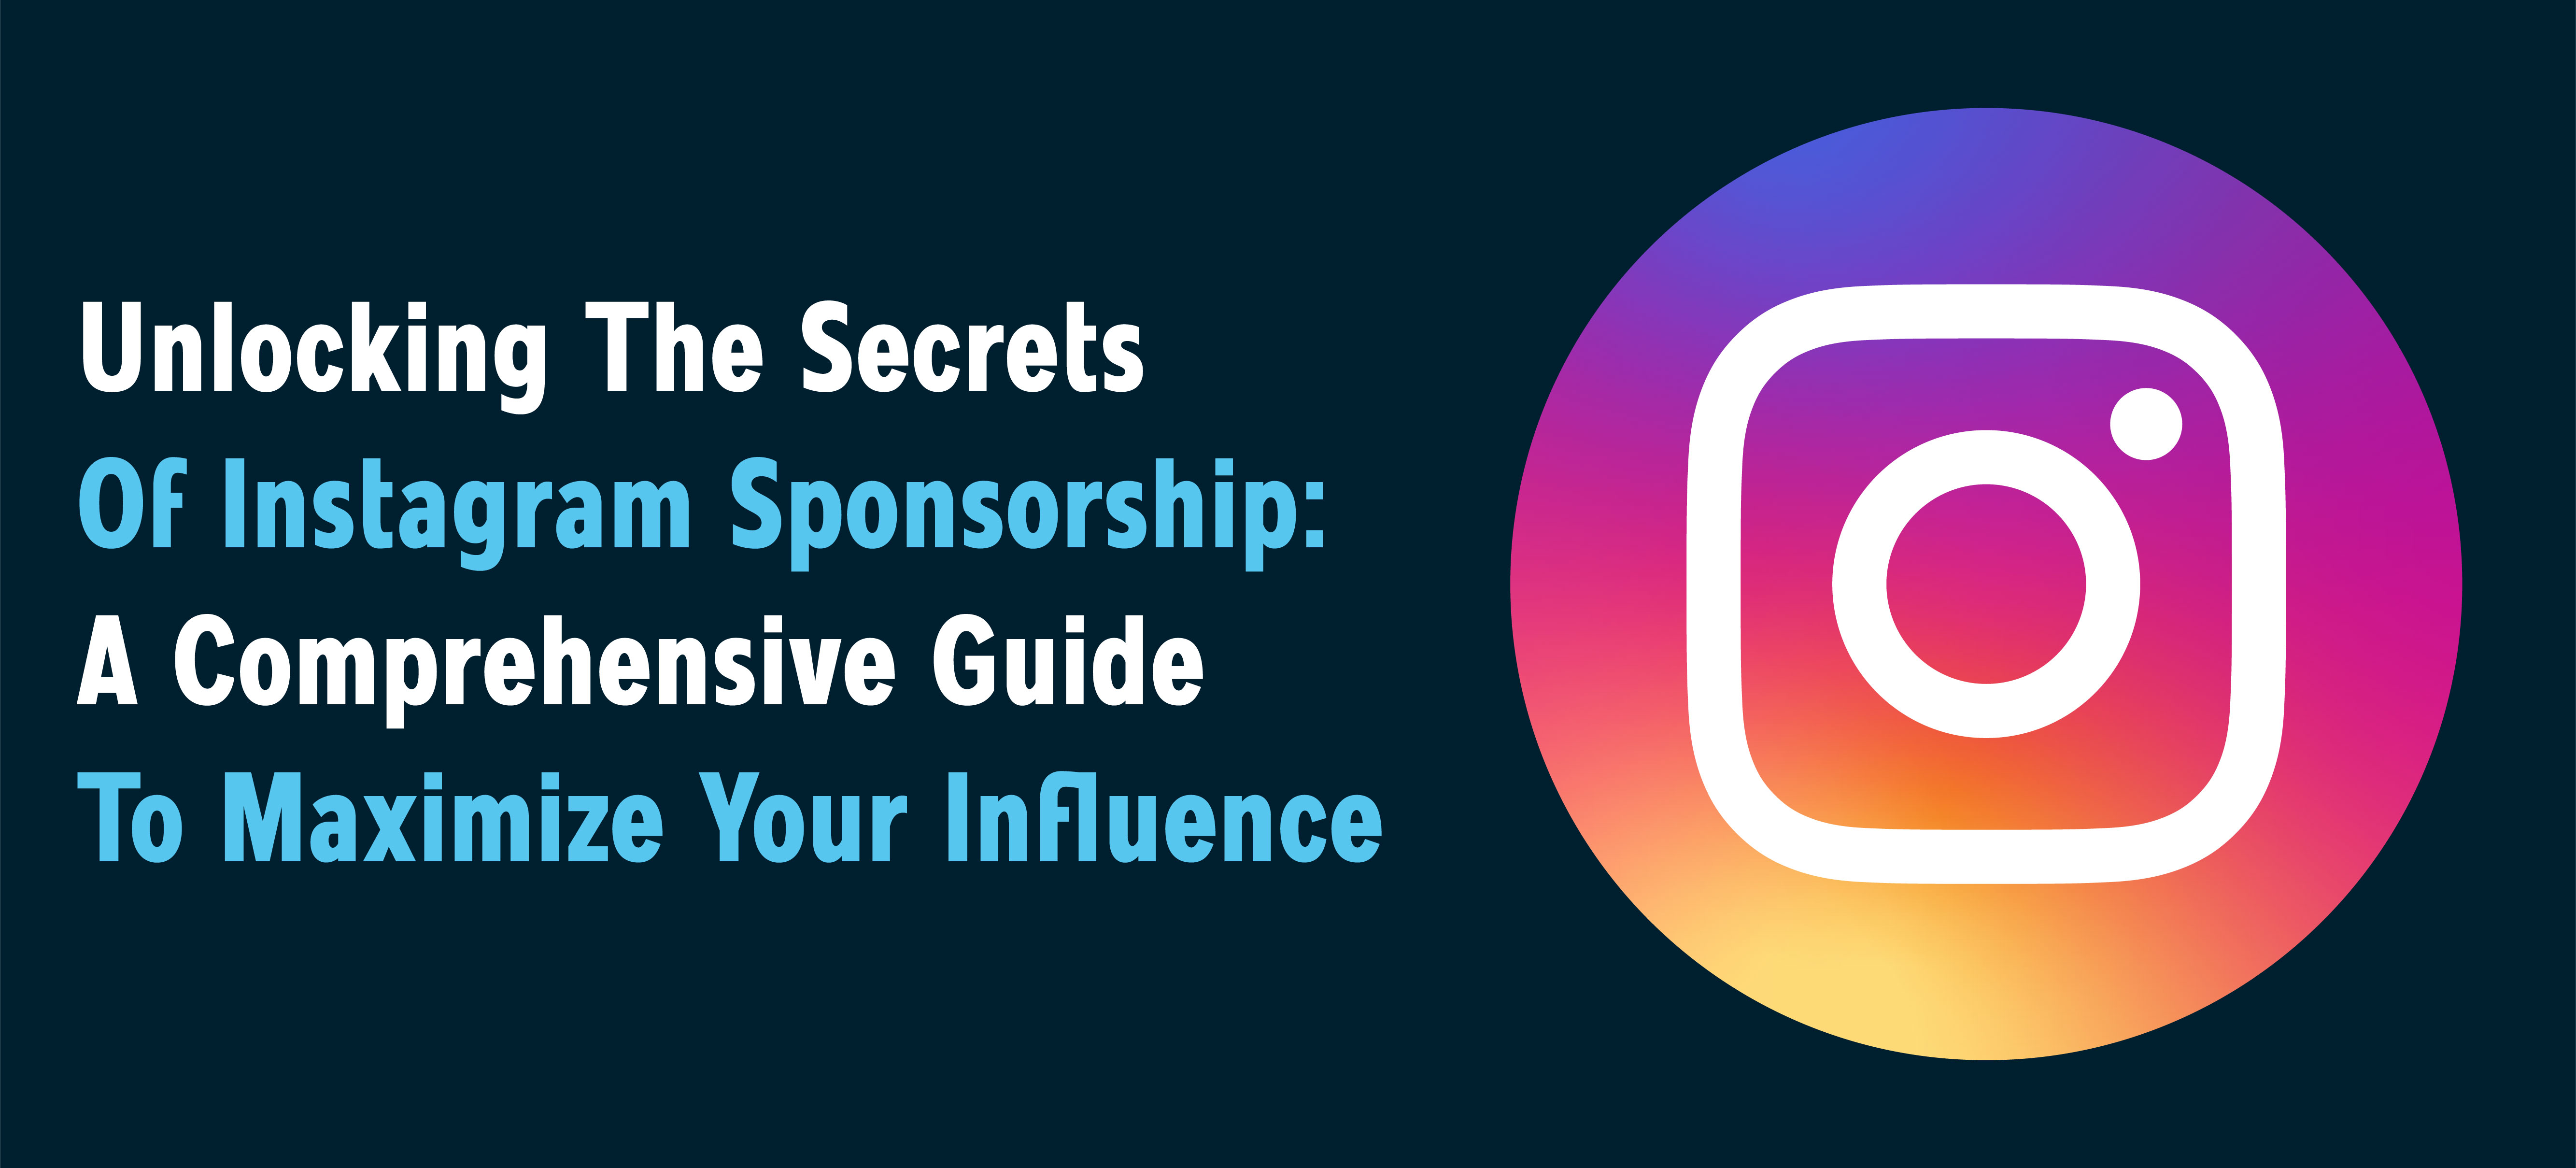 Unlocking The Secrets Of Instagram Sponsorship: A Comprehensive Guide To Maximize Your Influence